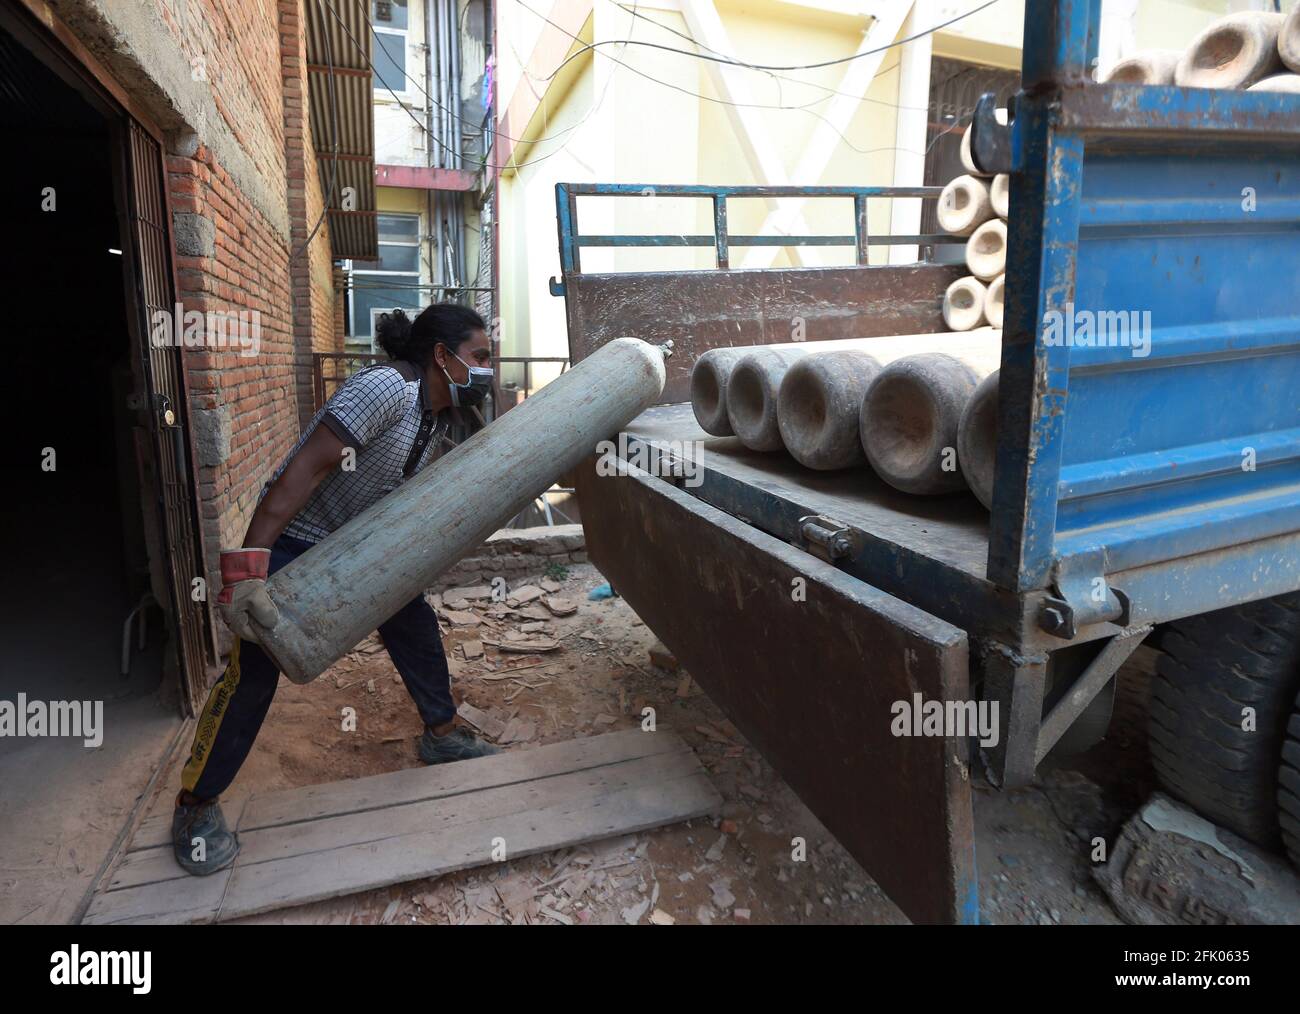 Kathmandu, Nepal. 27th Apr, 2021. A worker loads oxygen cylinders into a supply van to be transported to a hospital as the major second wave of the coronavirus disease (COVID-19) surges in Kathmandu, Nepal April 26, 2021. Credit: Dipen Shrestha/ZUMA Wire/Alamy Live News Stock Photo